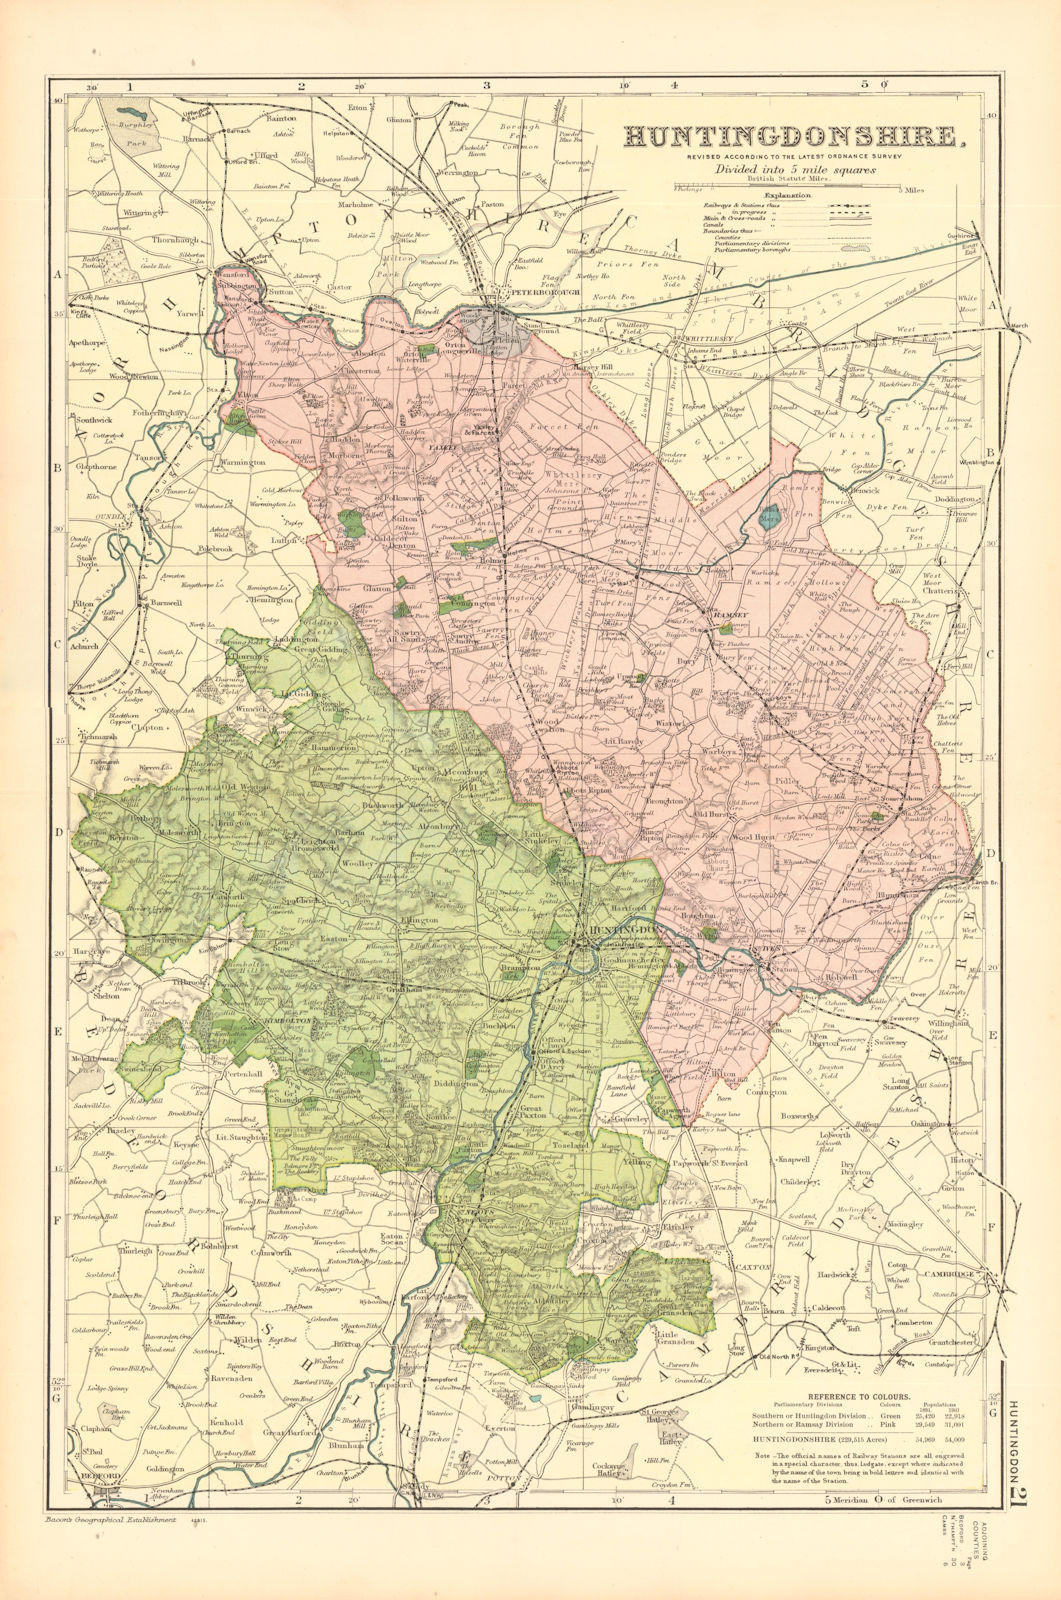 Associate Product HUNTINGDONSHIRE. Showing Parliamentary divisions,boroughs & parks.BACON 1904 map